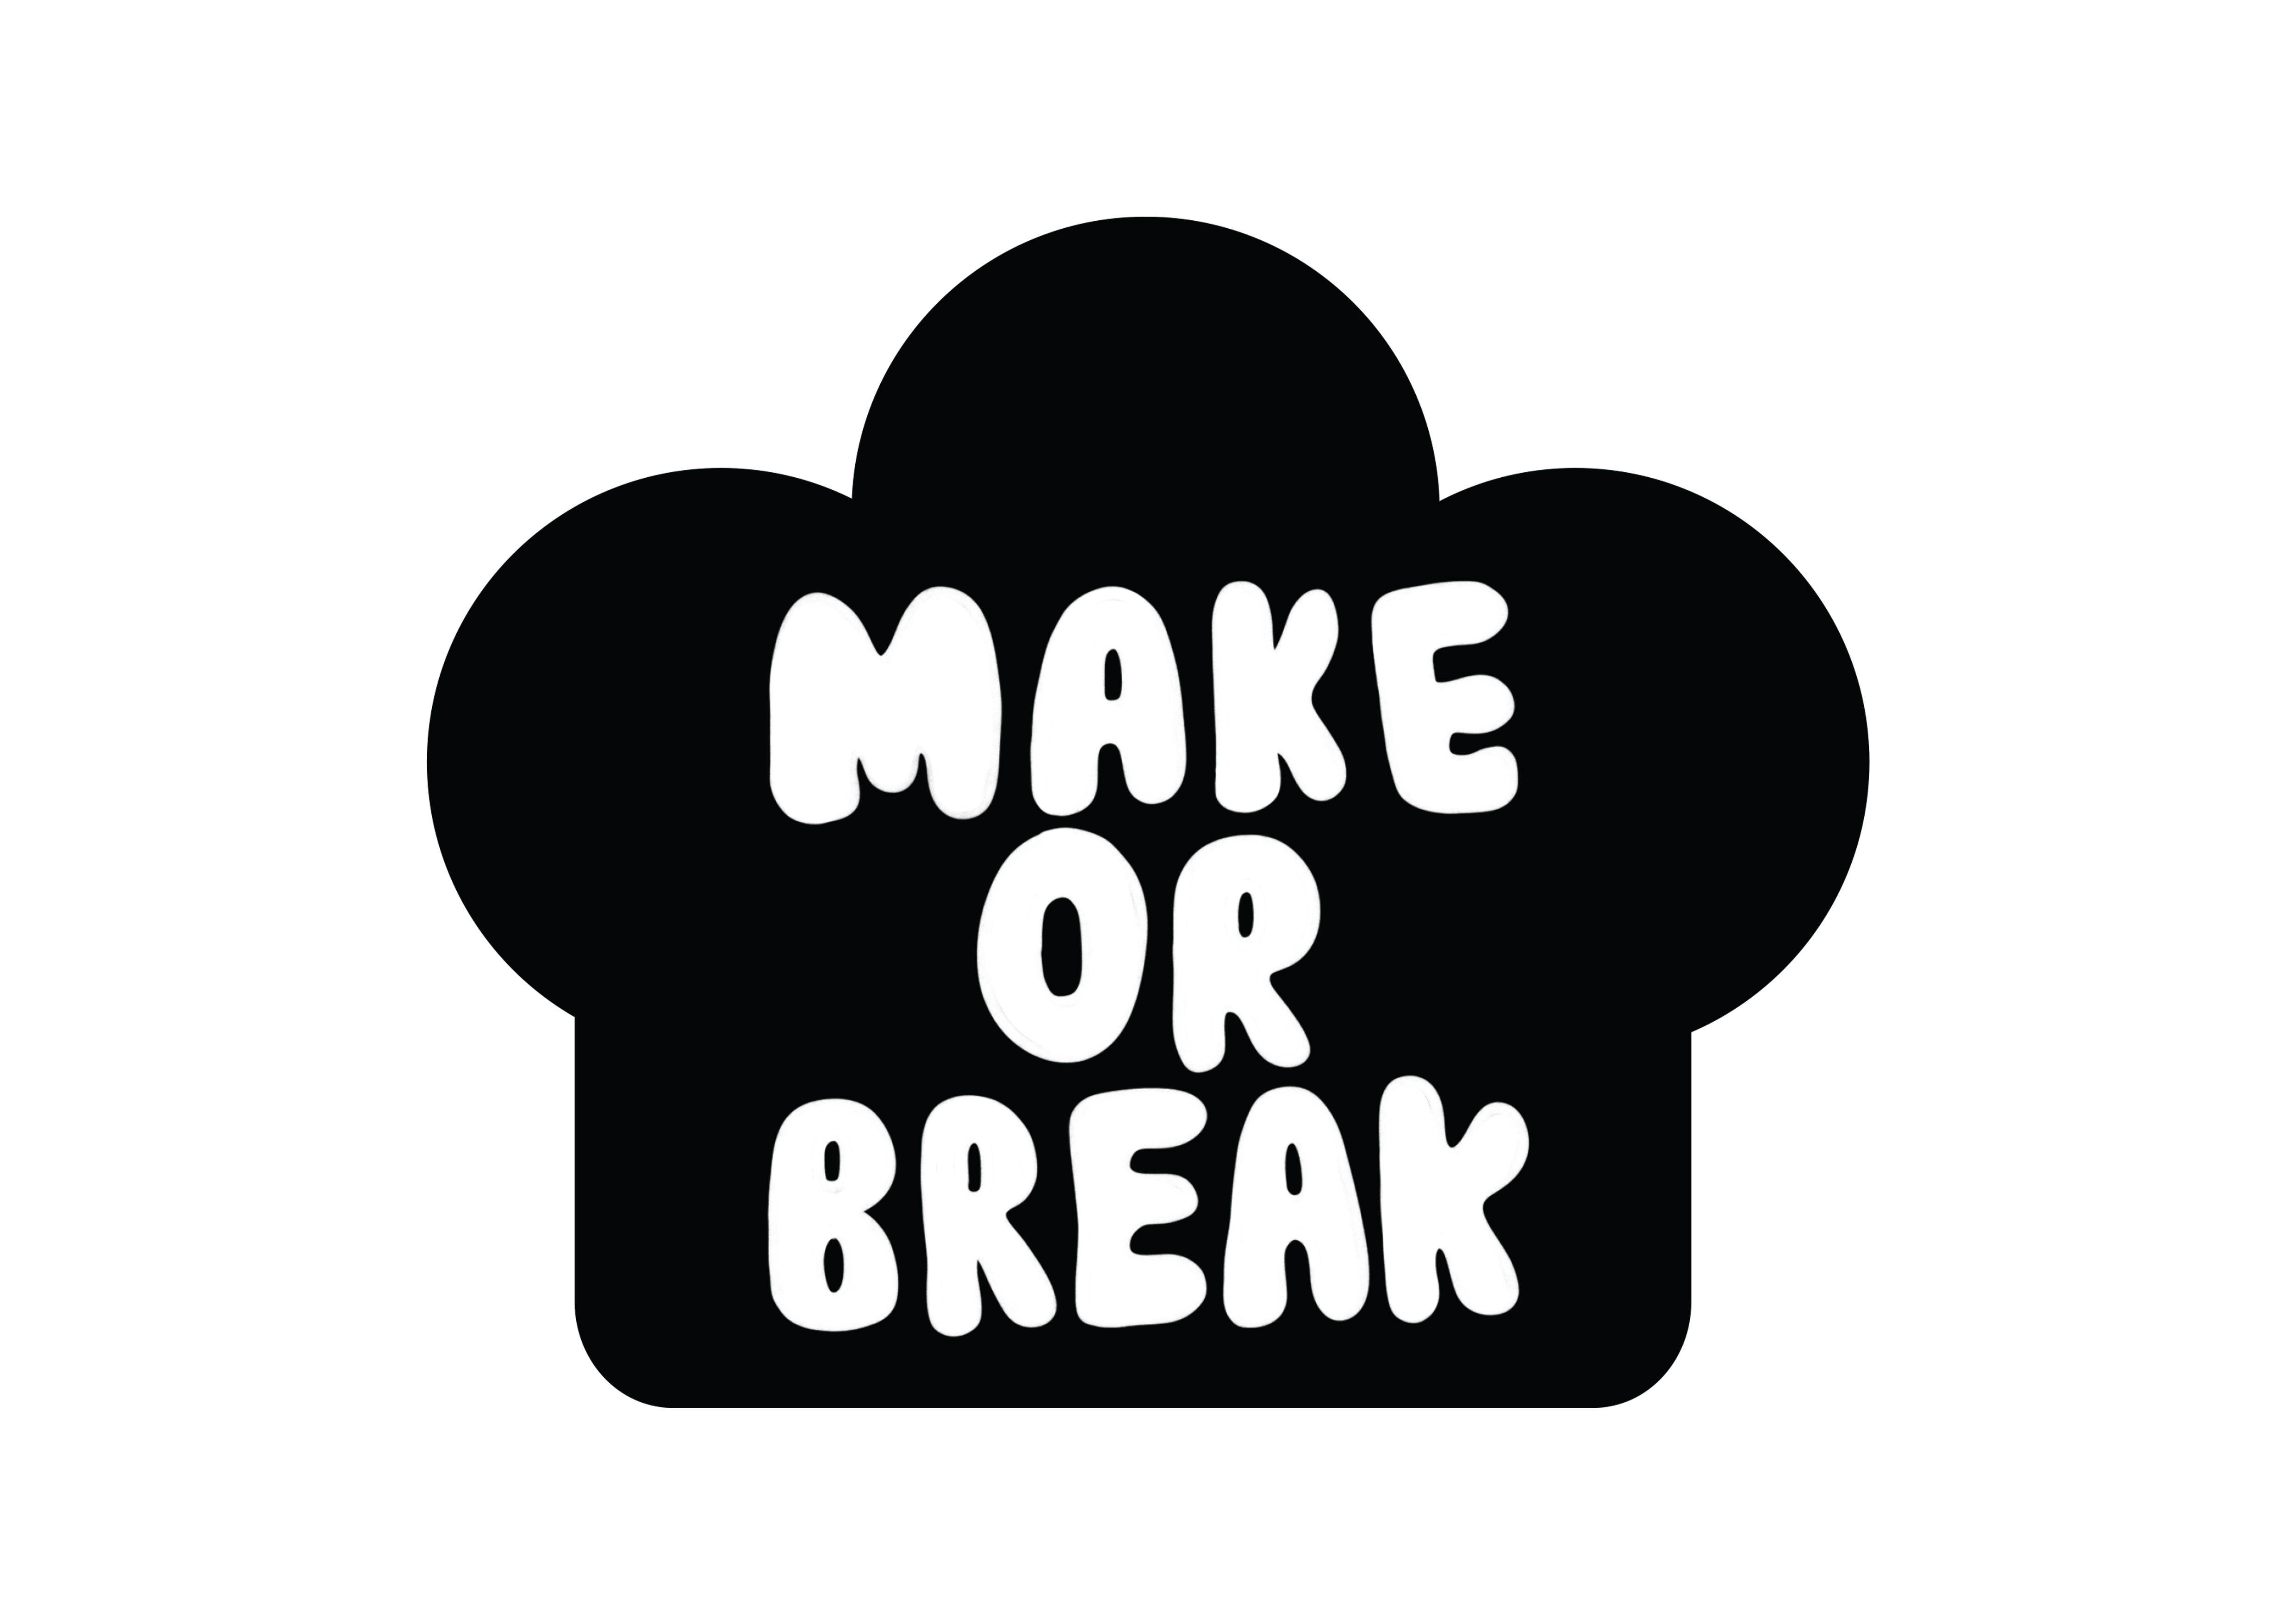 Black and White Make or Break logo, a double meaning logo showing type through a chef's hat and bread to add that baking element! Created by Hattie Holmes